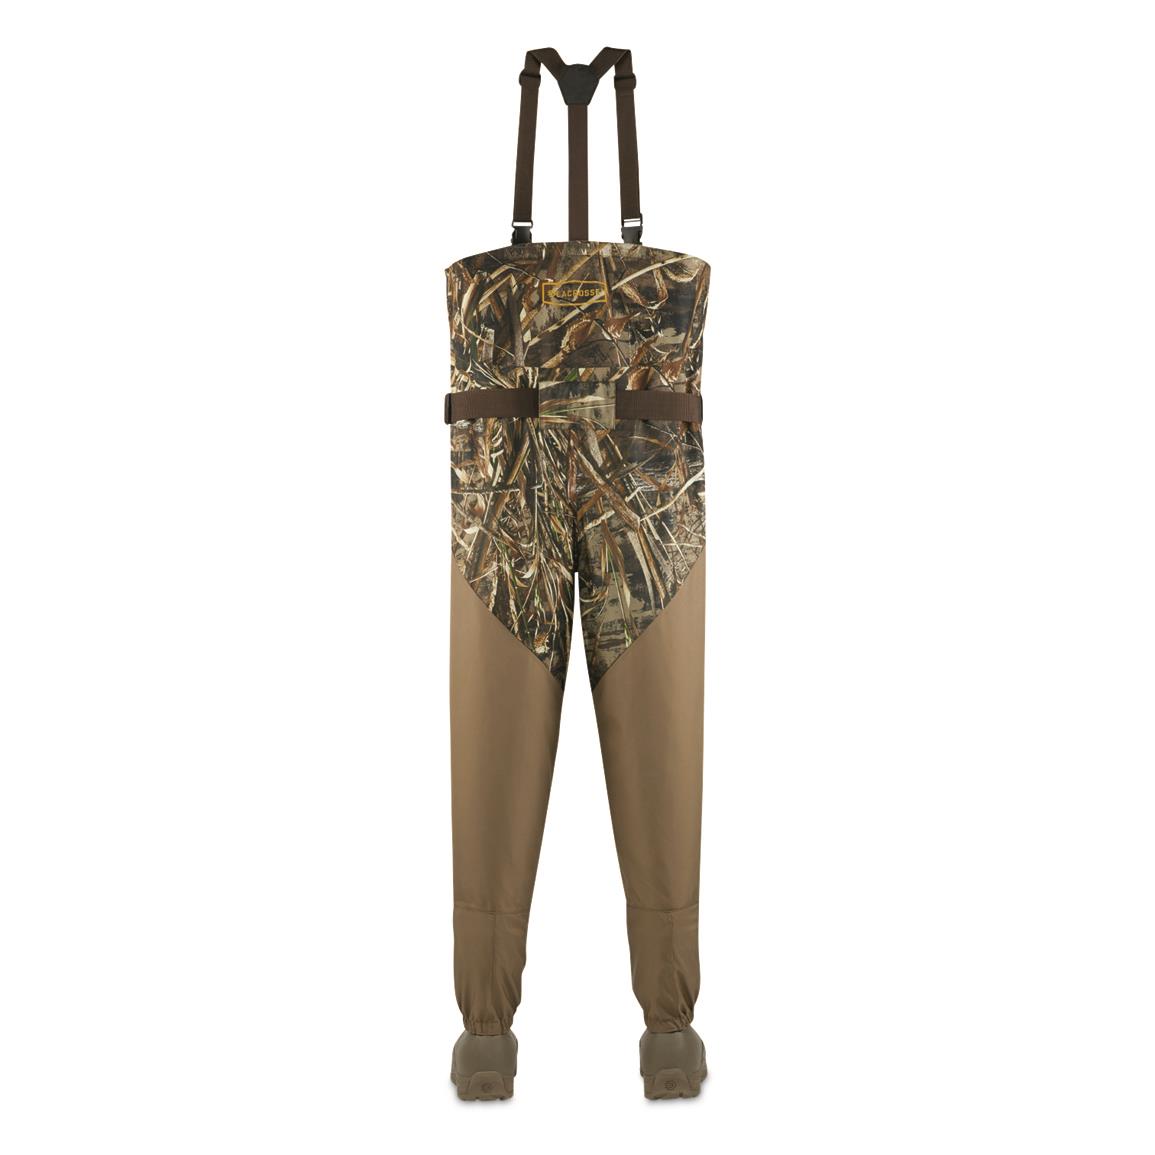 Guide Gear Mens Breathable Hunting Chest Waders with Boots, Camo with 800-Gram Insulation, Stout Sizes, Men's, Green